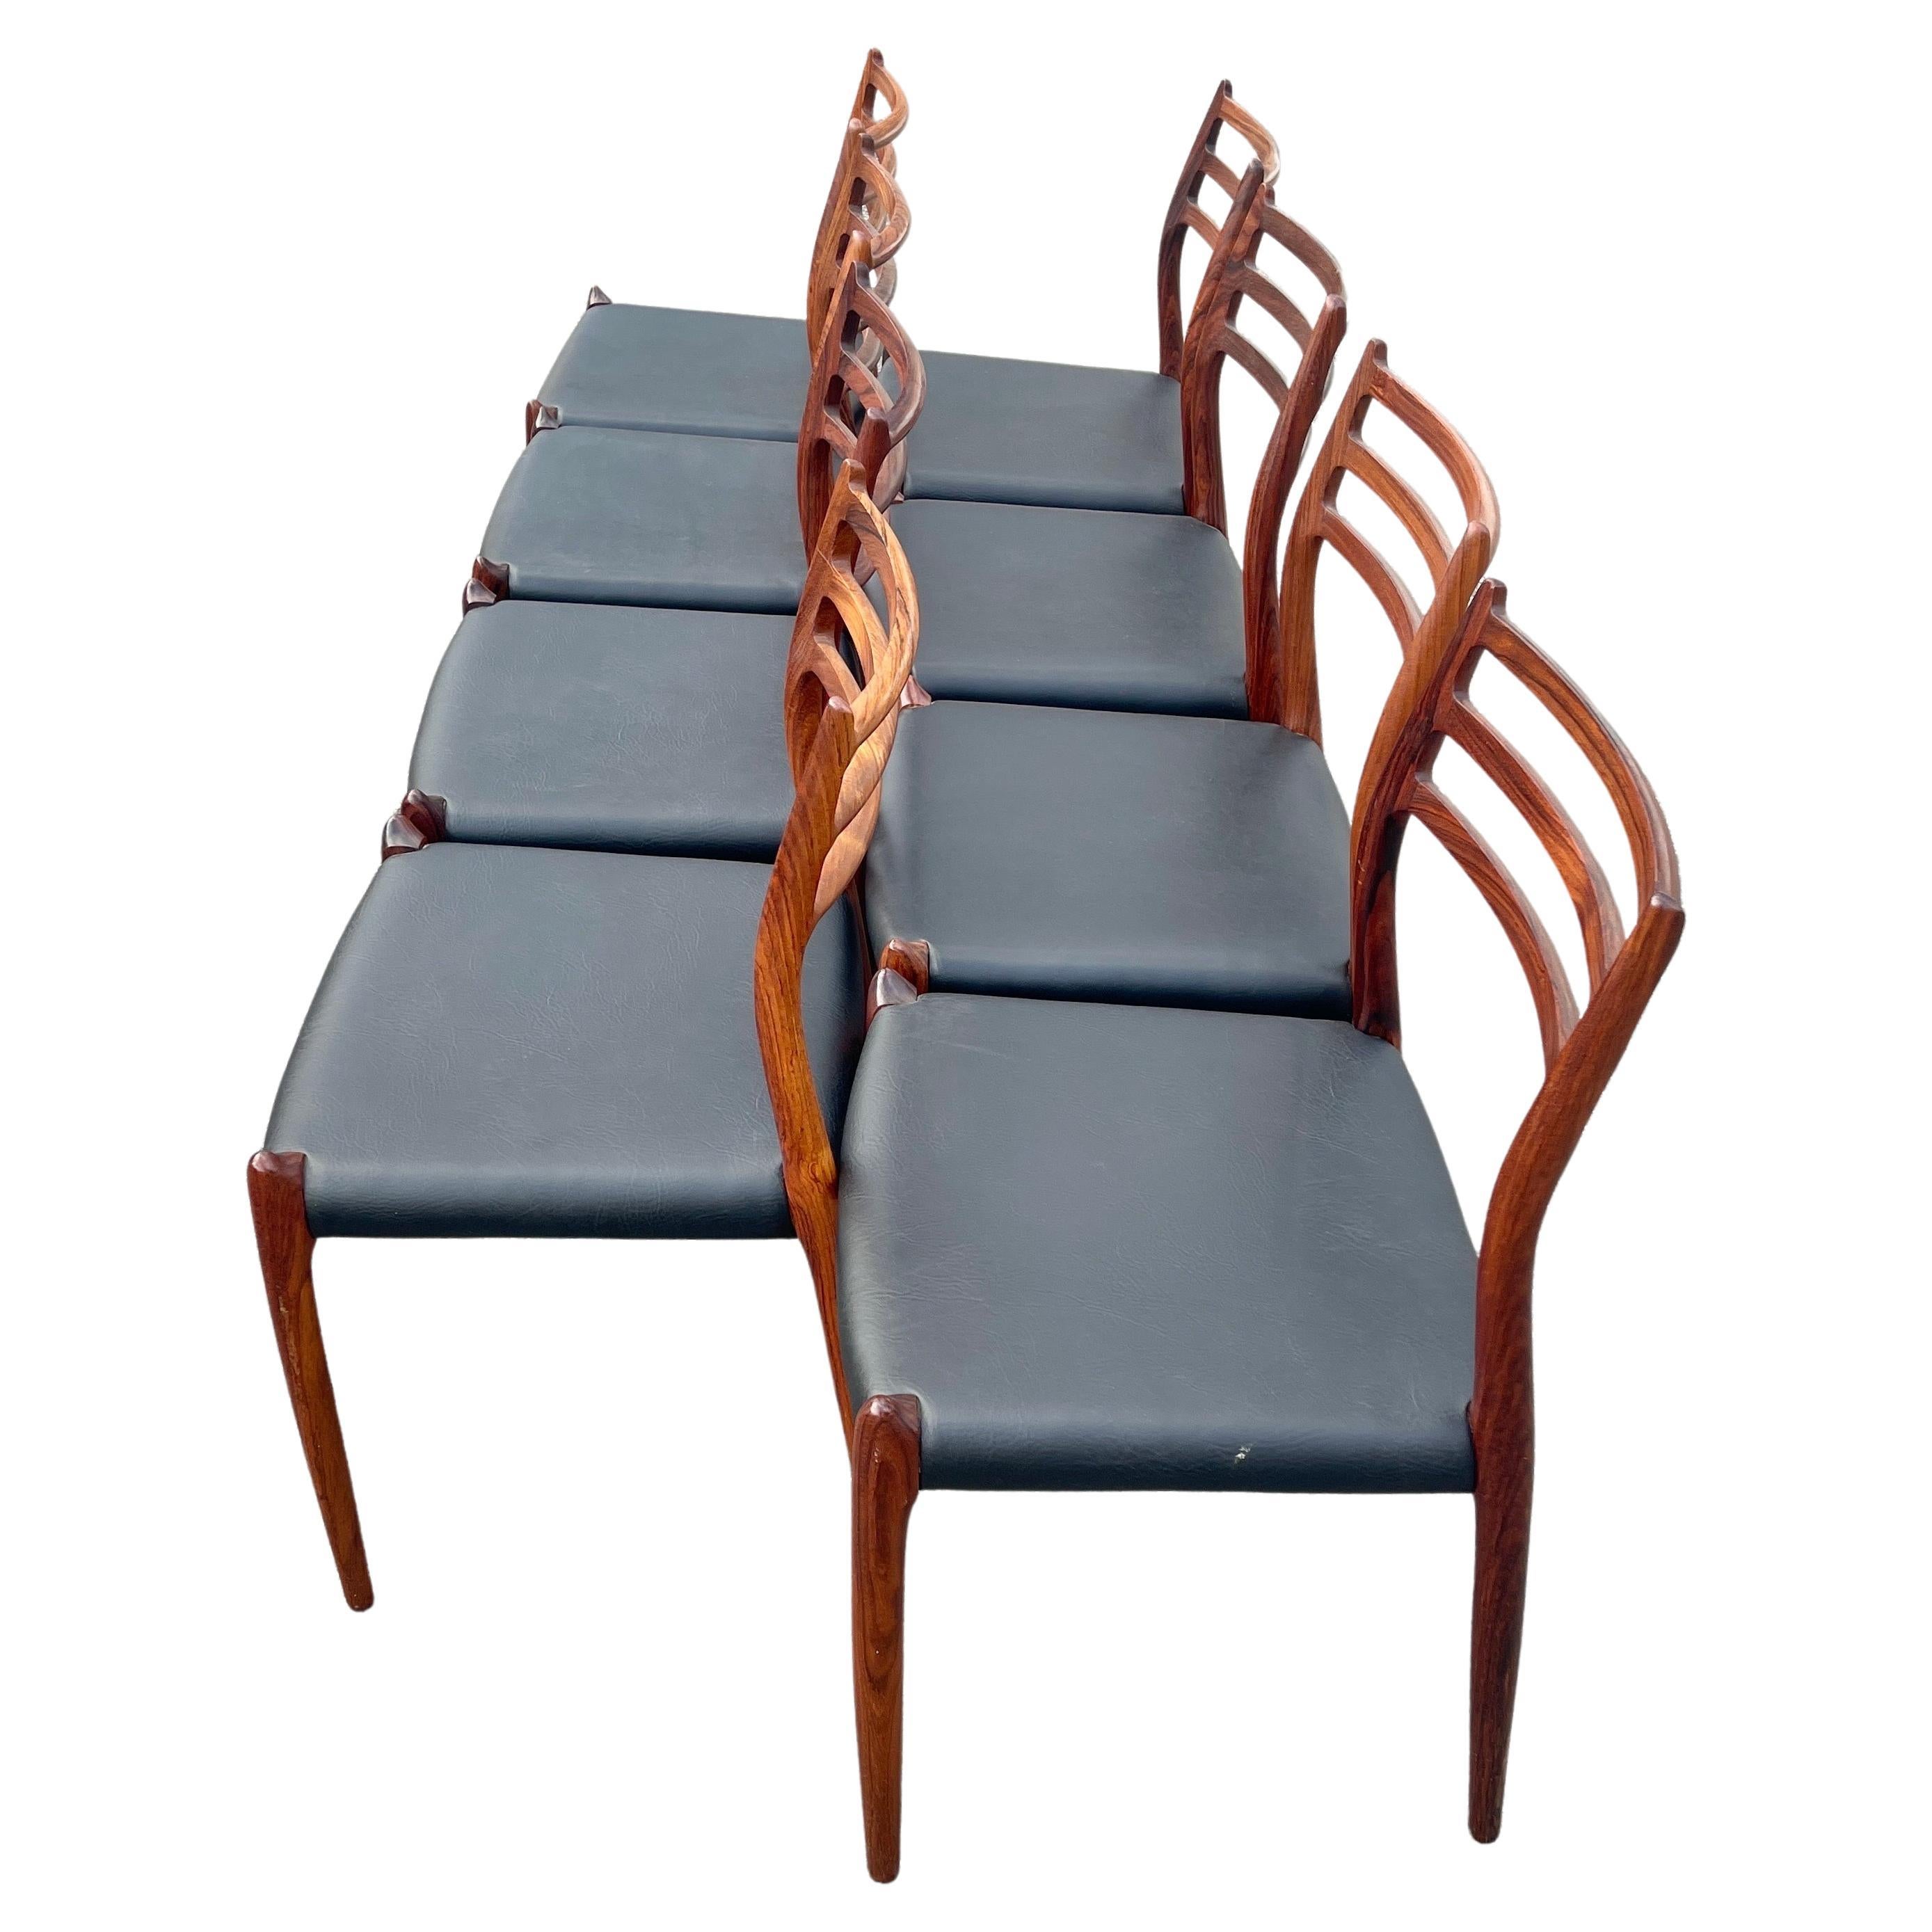 Hand-Crafted Set of 8 Danish Model 78 Rosewood Dining Chairs, by Niels O. Møller 